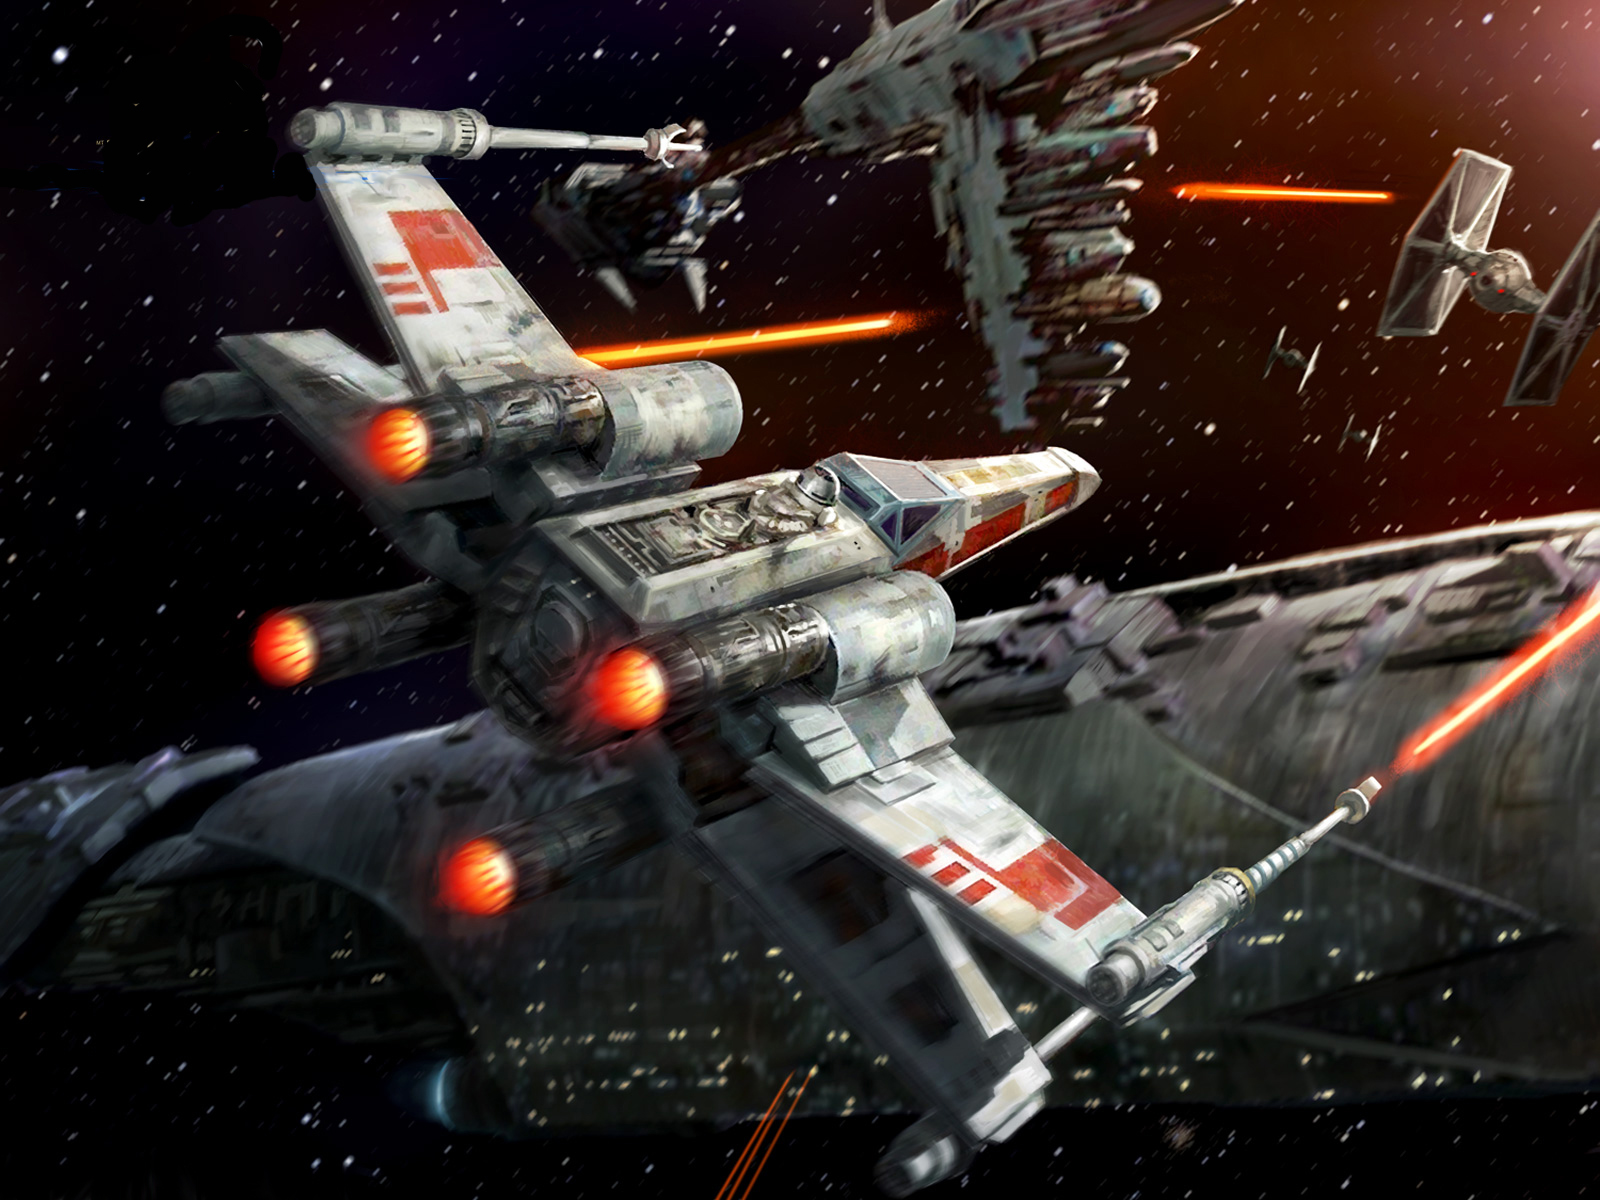 http://vignette4.wikia.nocookie.net/starwars/images/f/ff/X-wing_SWGTCG.jpg/revision/latest?cb=20090319165201